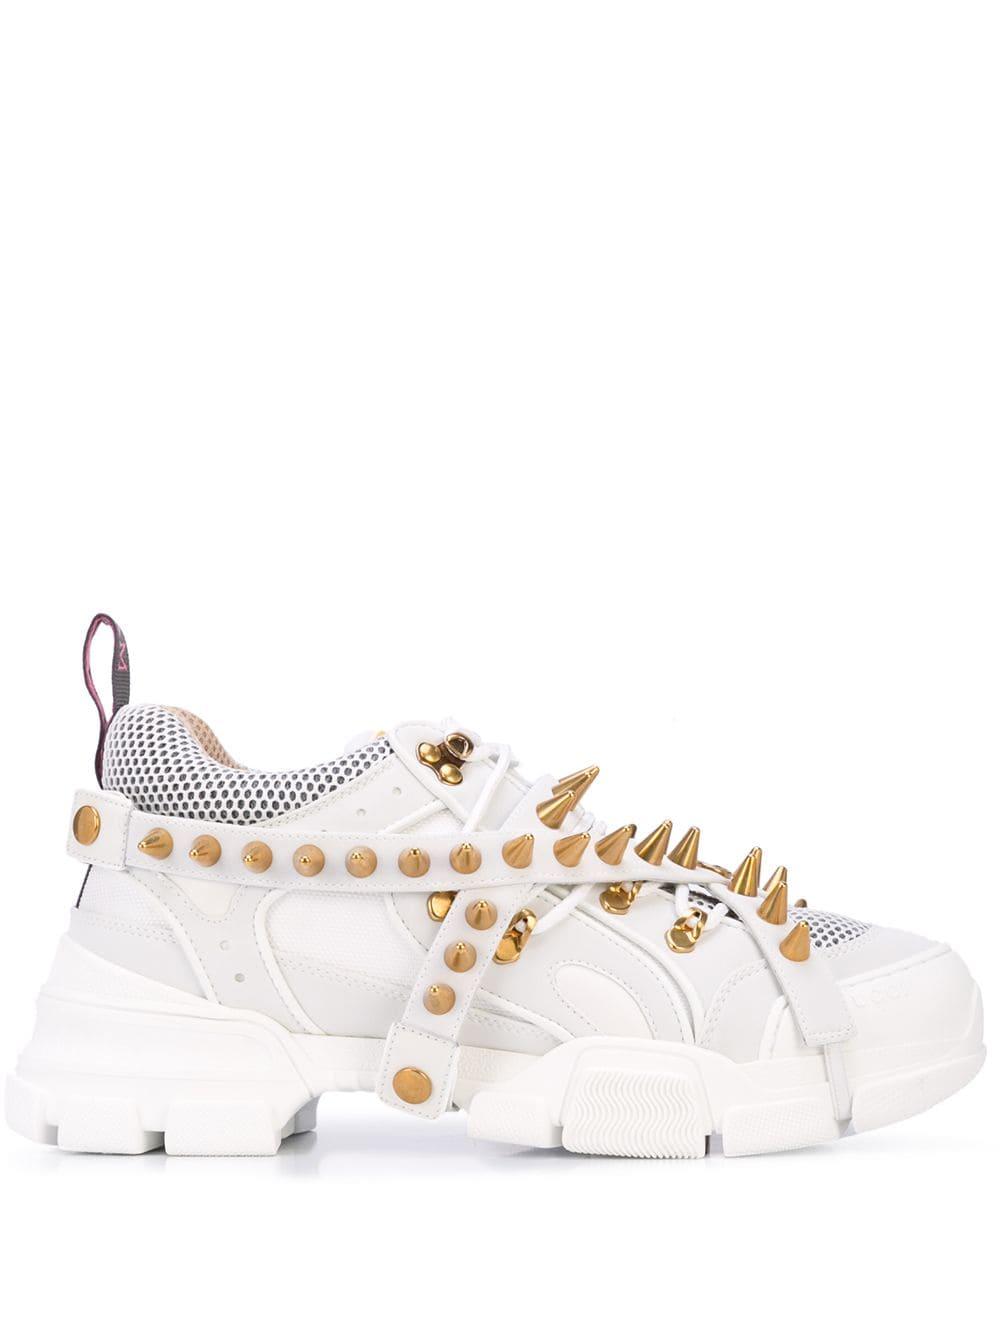 Gucci Flashtrek Removable Spikes Sneakers in gr.wh (White) for Men - Lyst